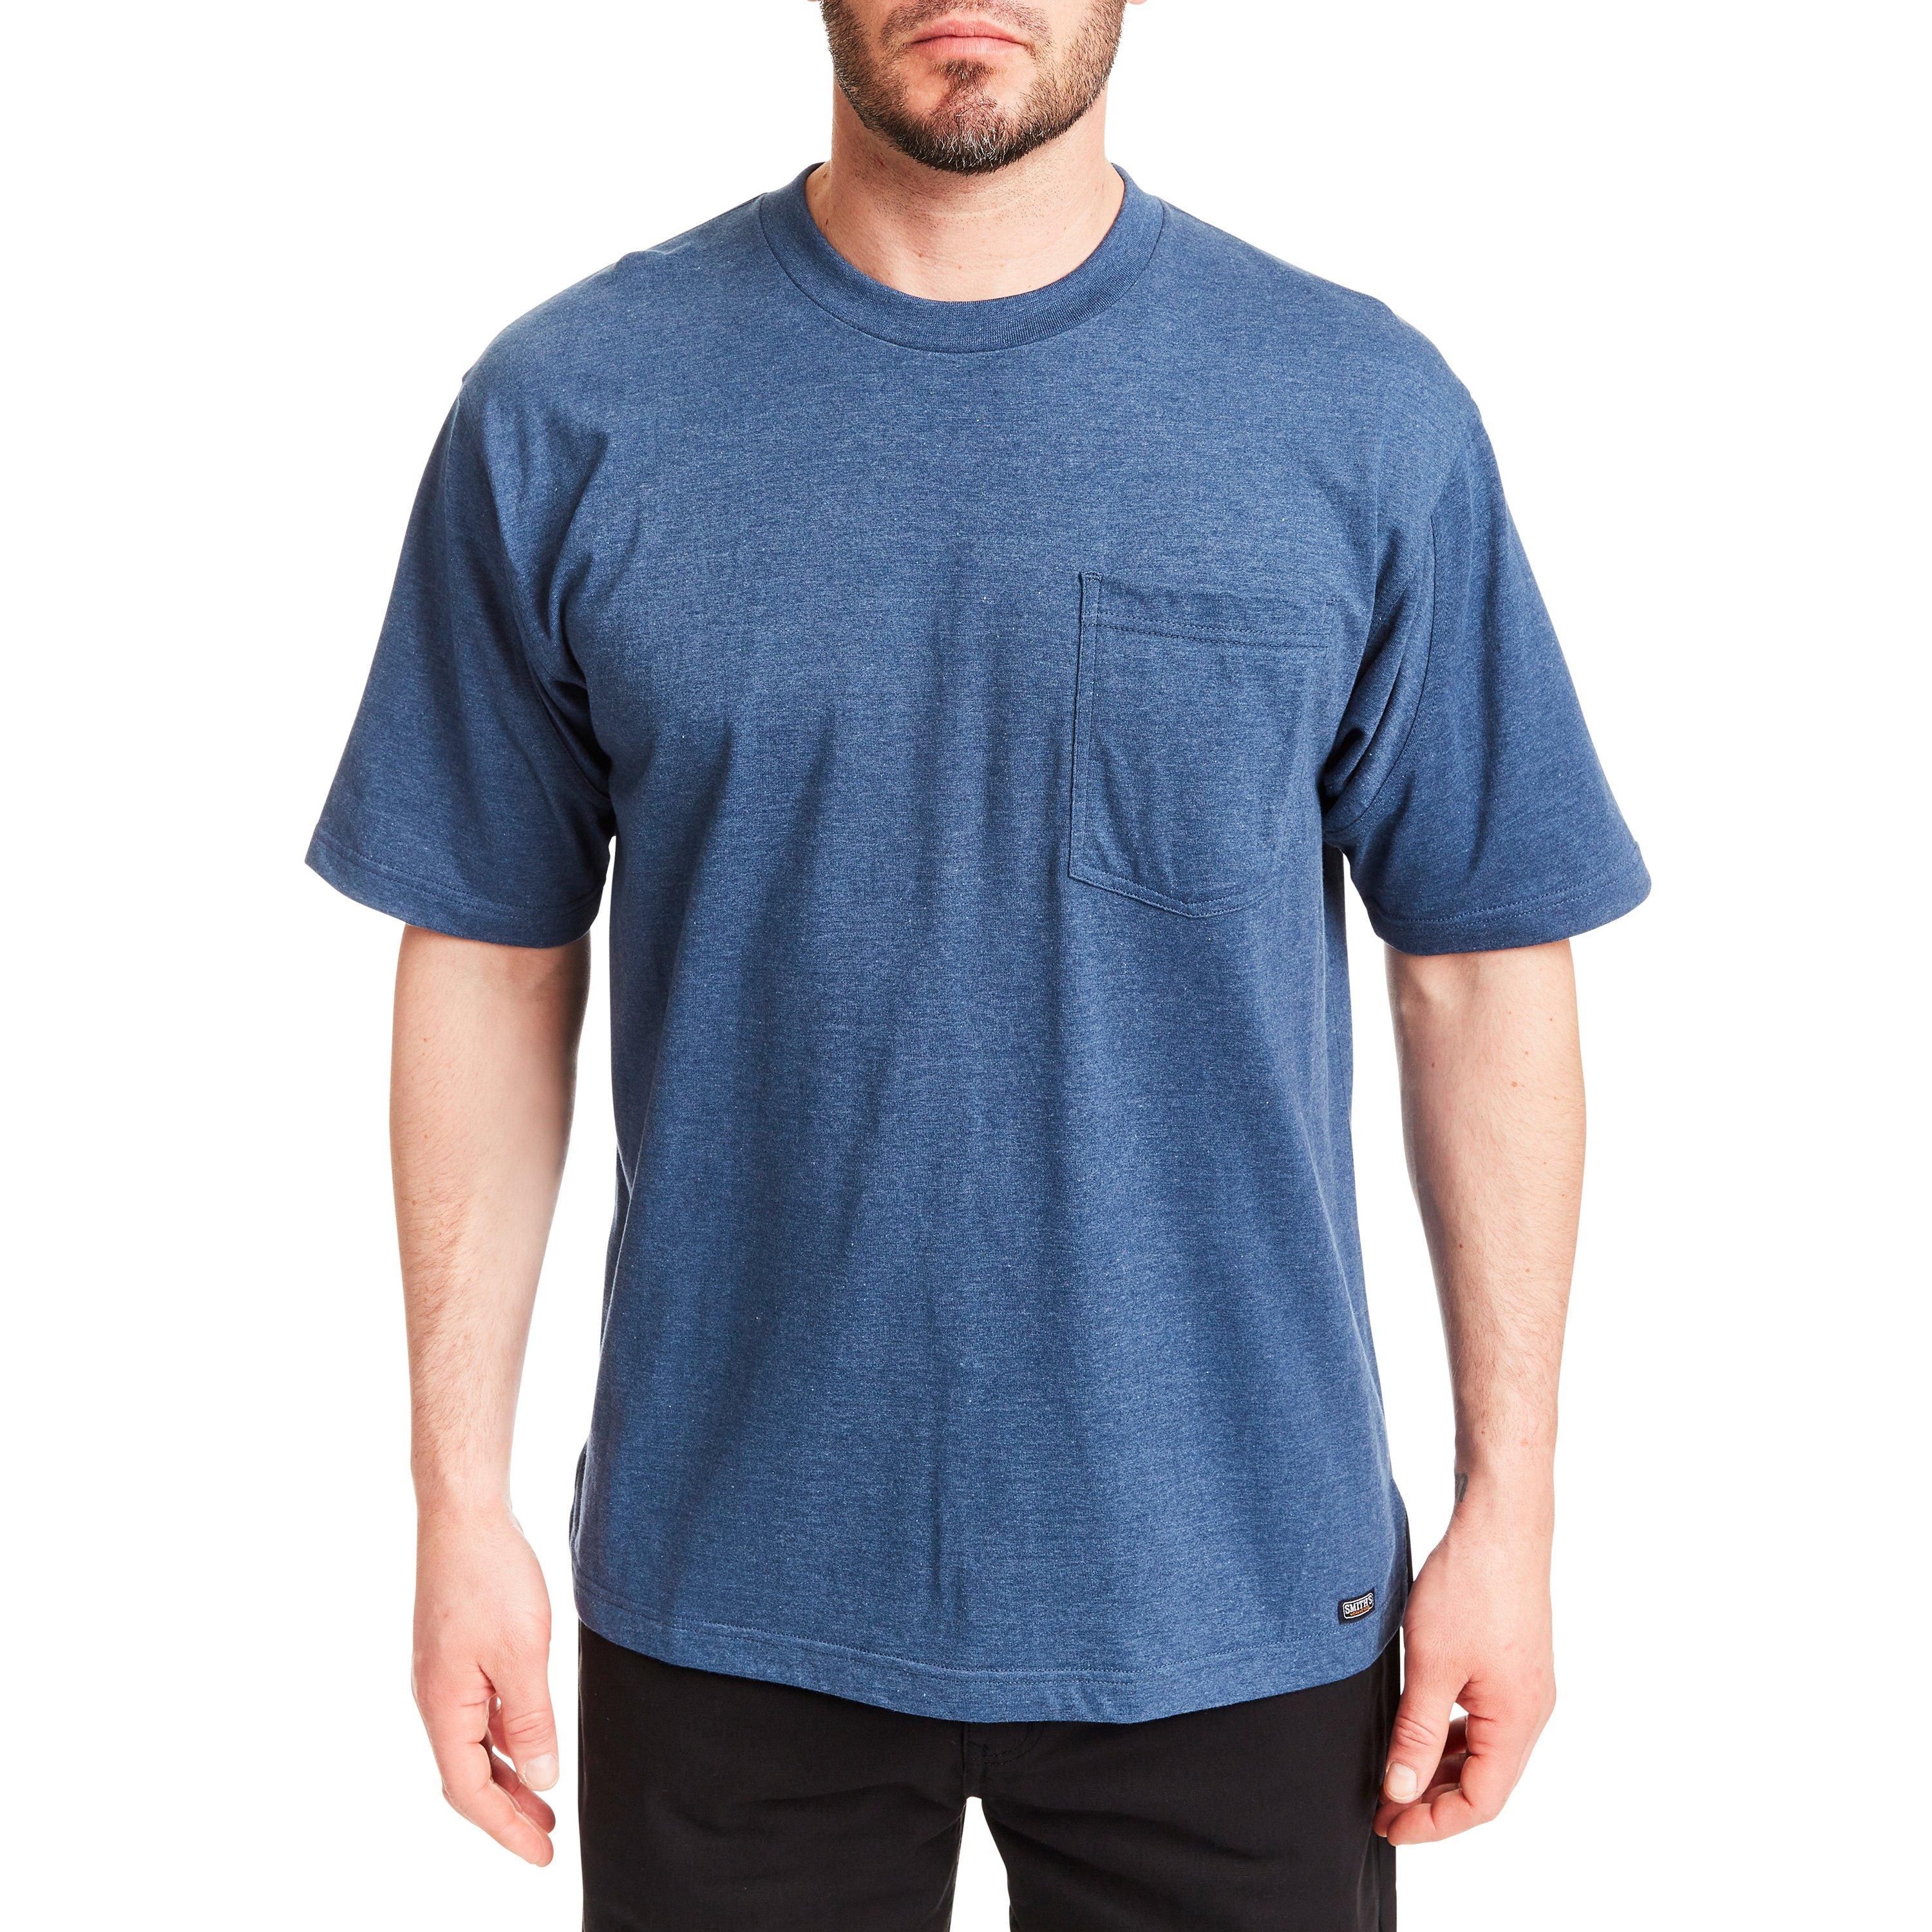 Smith's Workwear Mens Cotton Crew Neck Extended Tail Tee